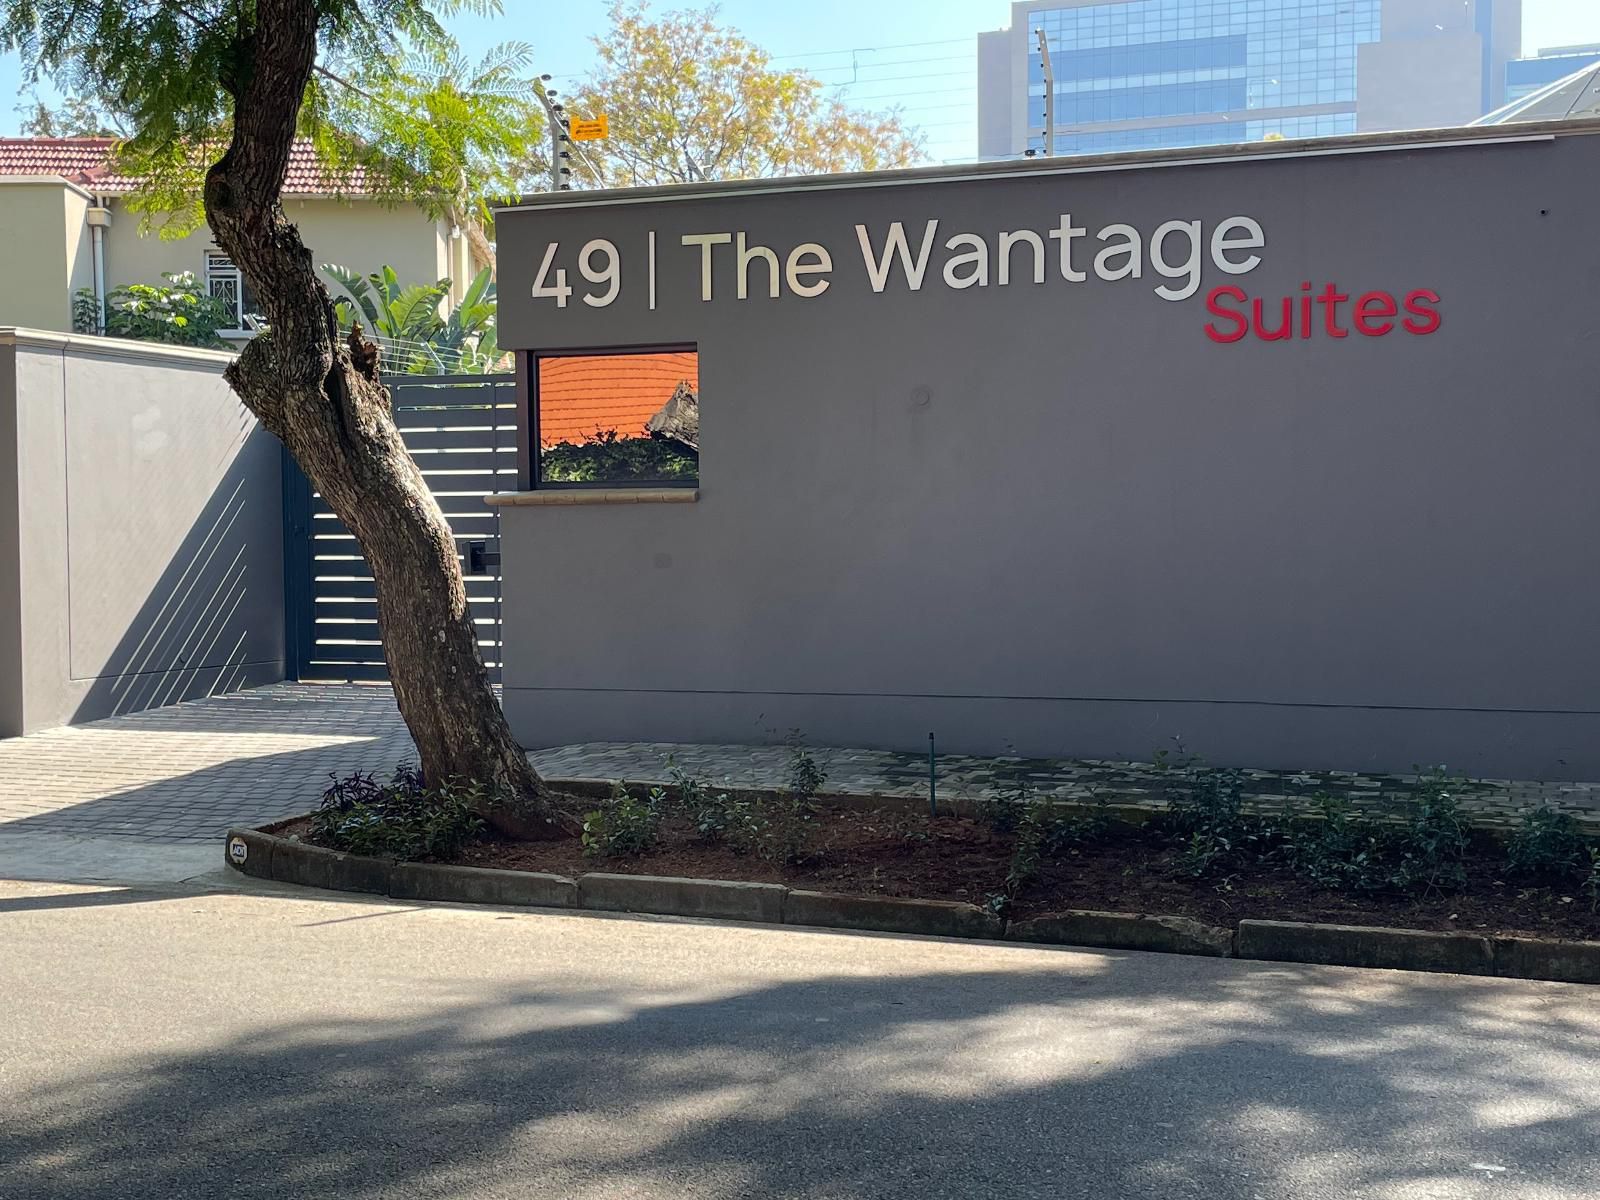 The Wantage Suites Rosebank Johannesburg Gauteng South Africa House, Building, Architecture, Sign, Window